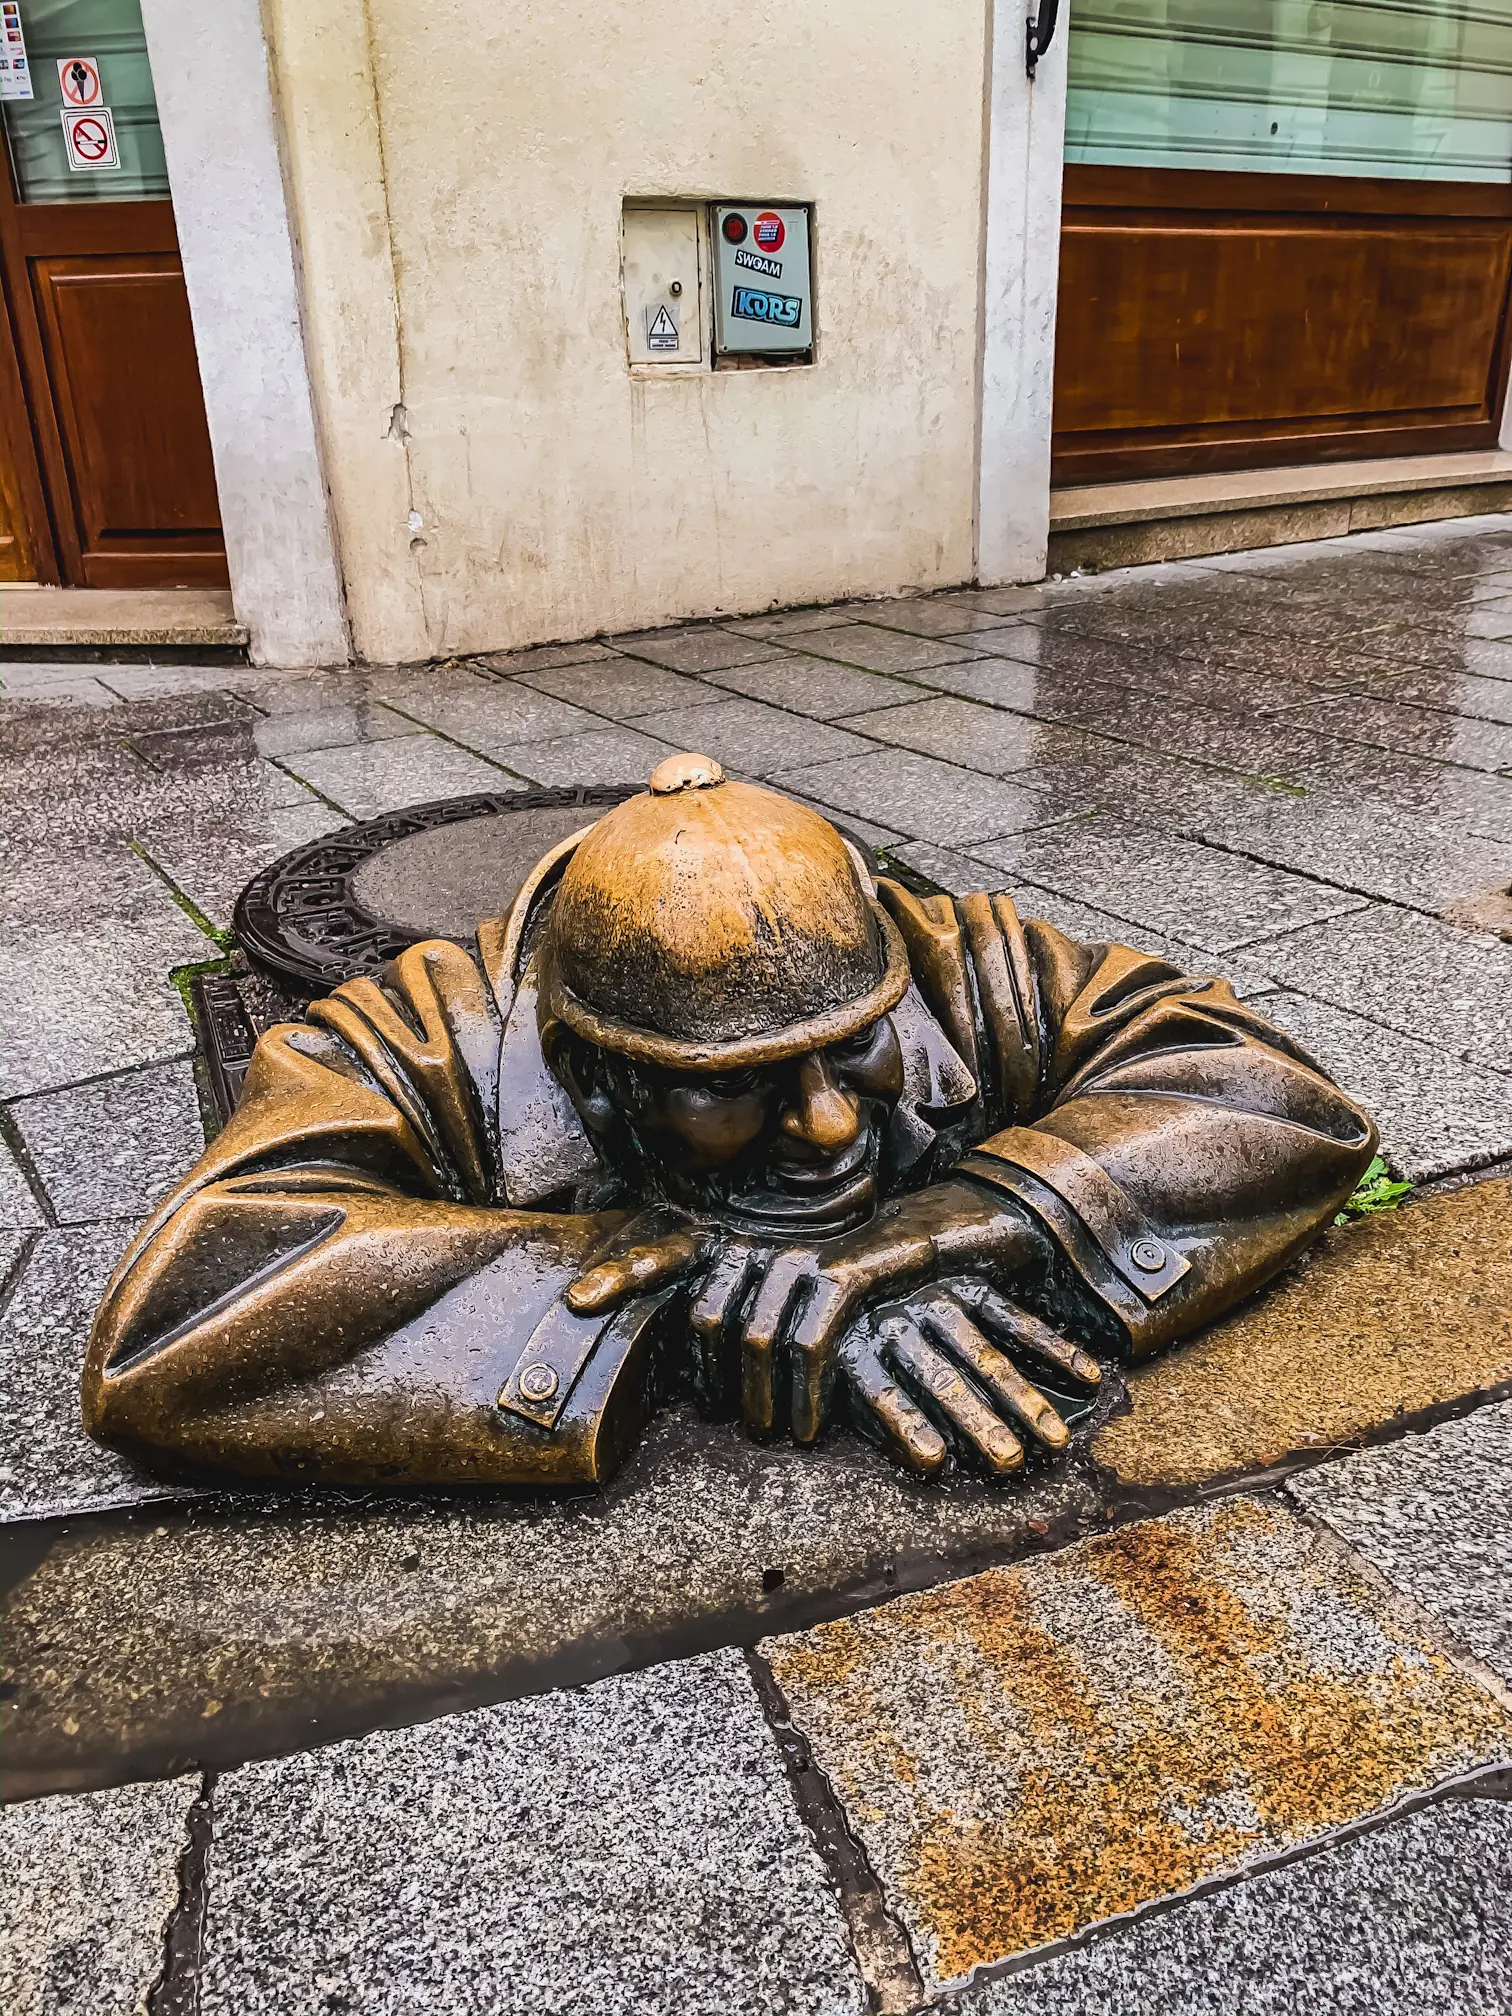 Man at Work statue. A bronze cast statue of a man peering out of a manhole.